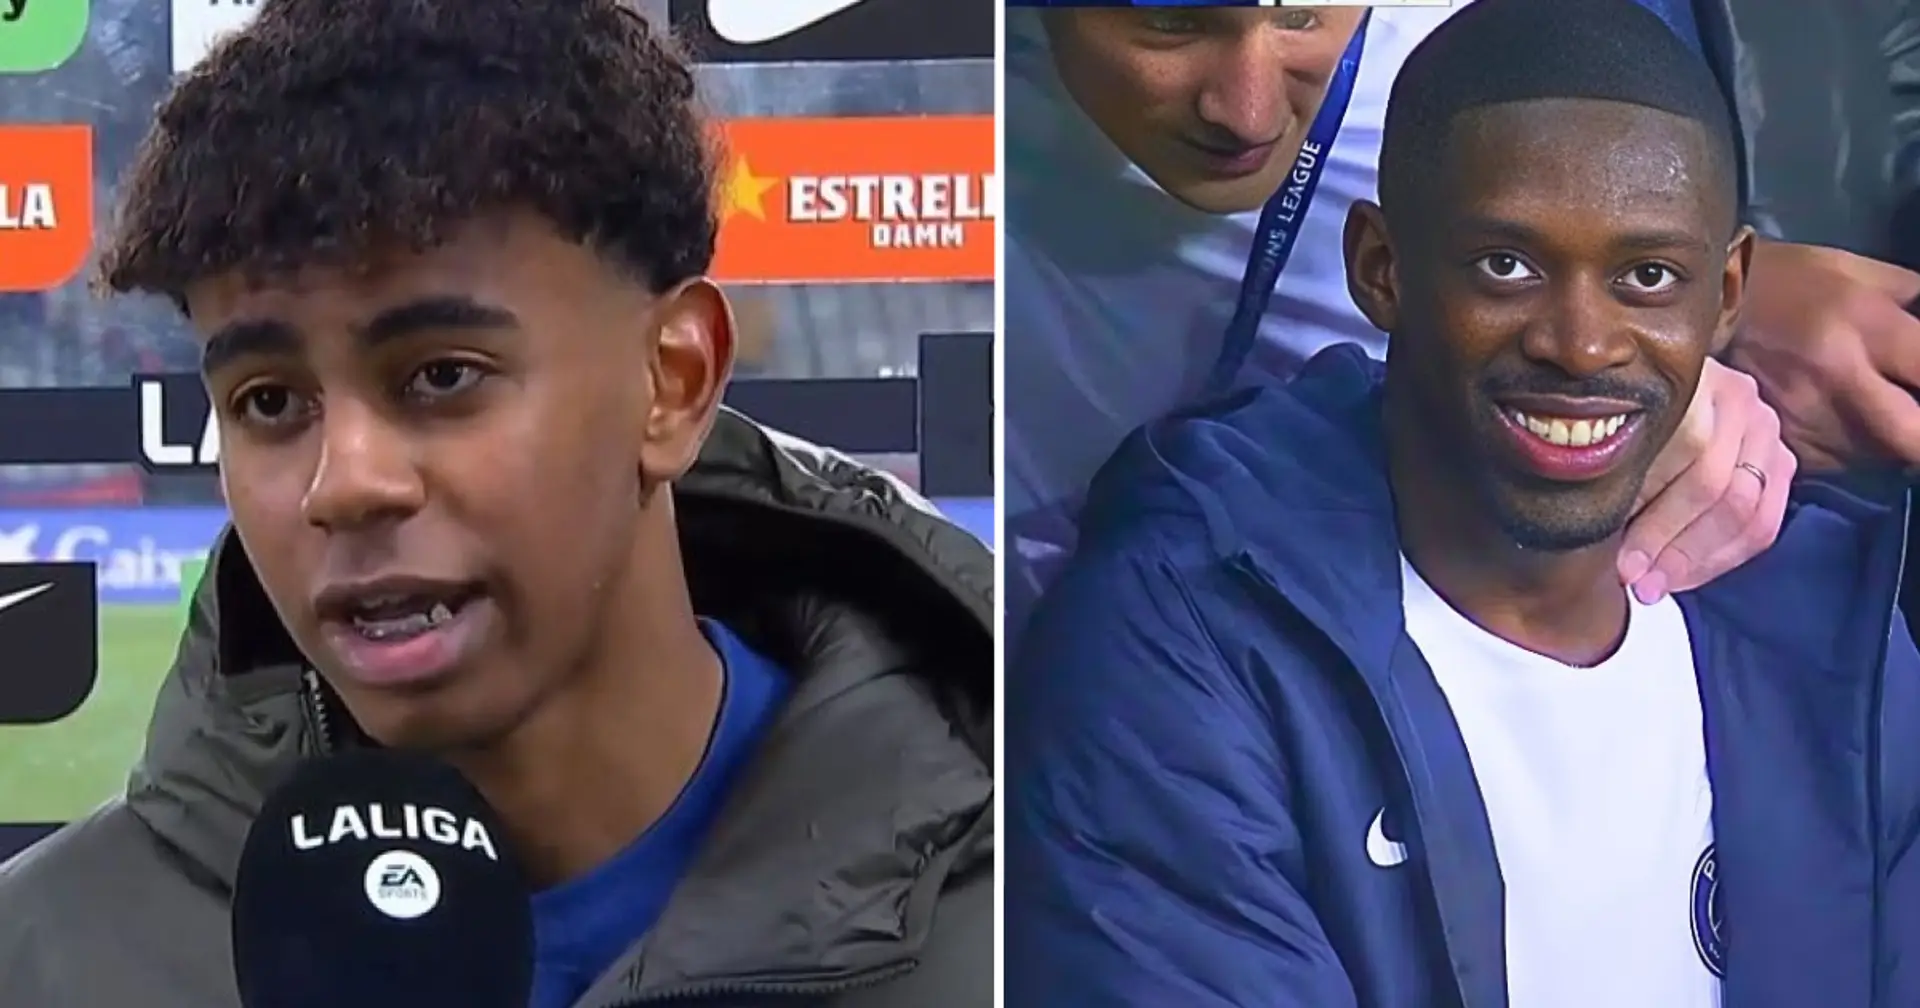 Lamine Yamal or Ousmane Dembele, who has been better this season? Explained in 30 seconds